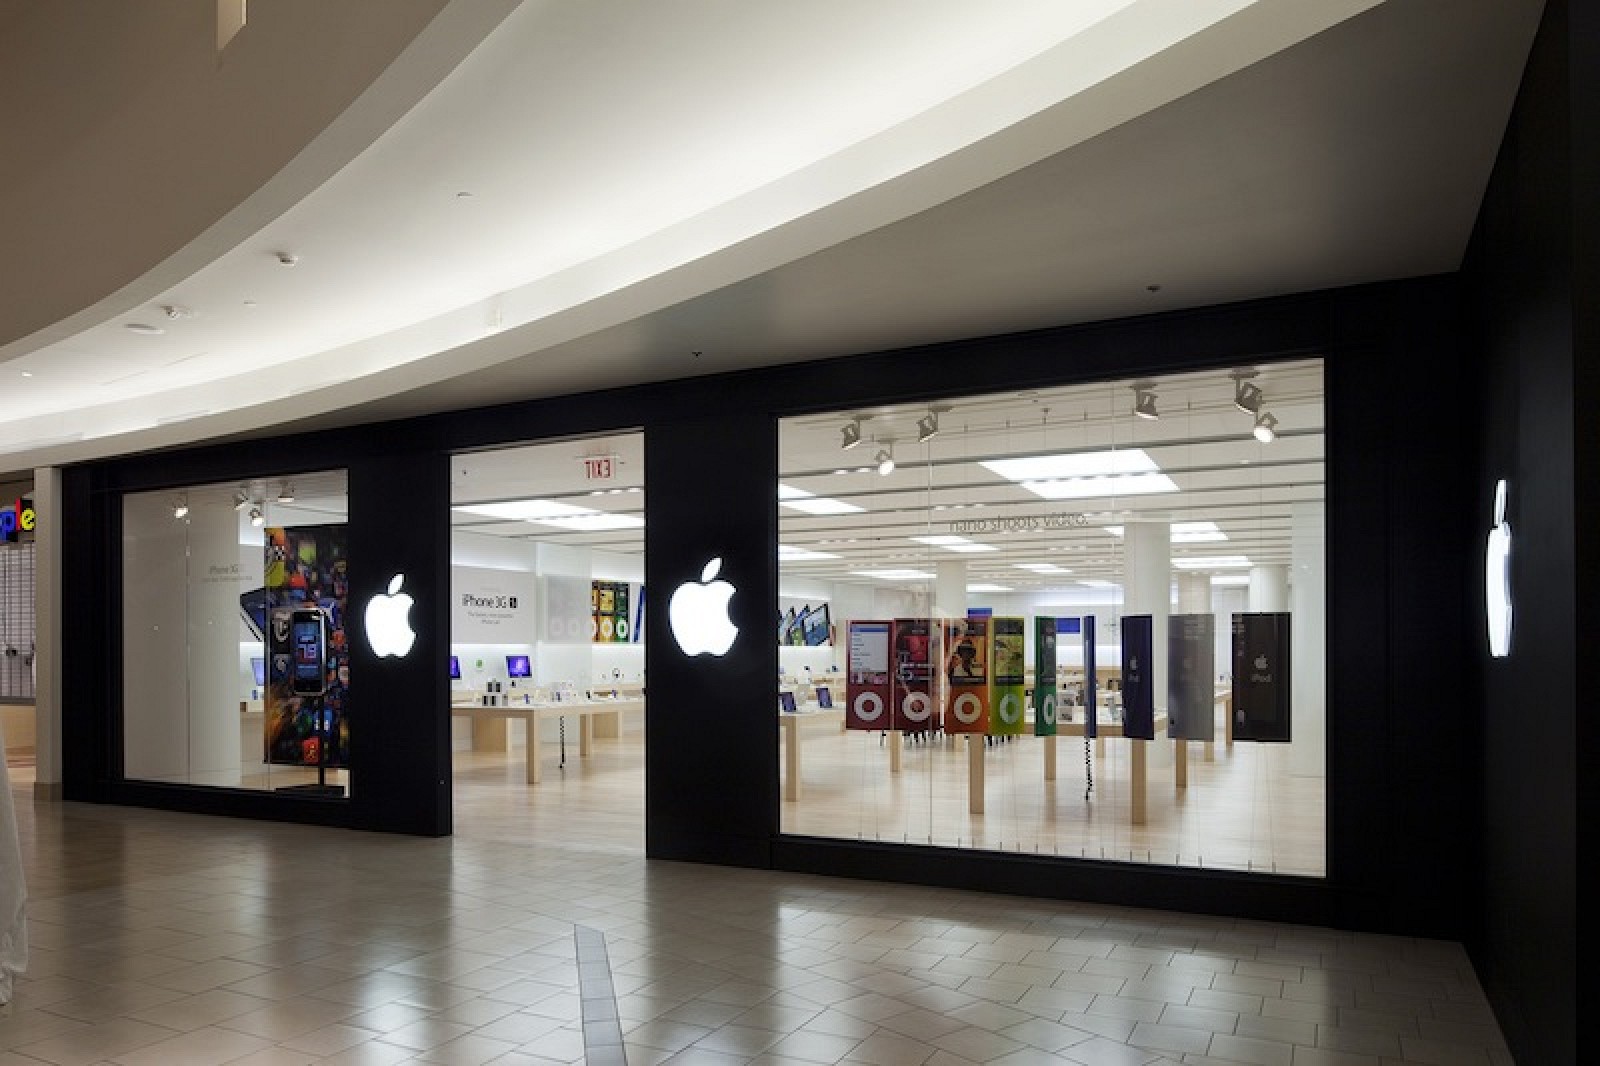 Apple's Sixth-Oldest Store Relocating on January 28 After 15 Years